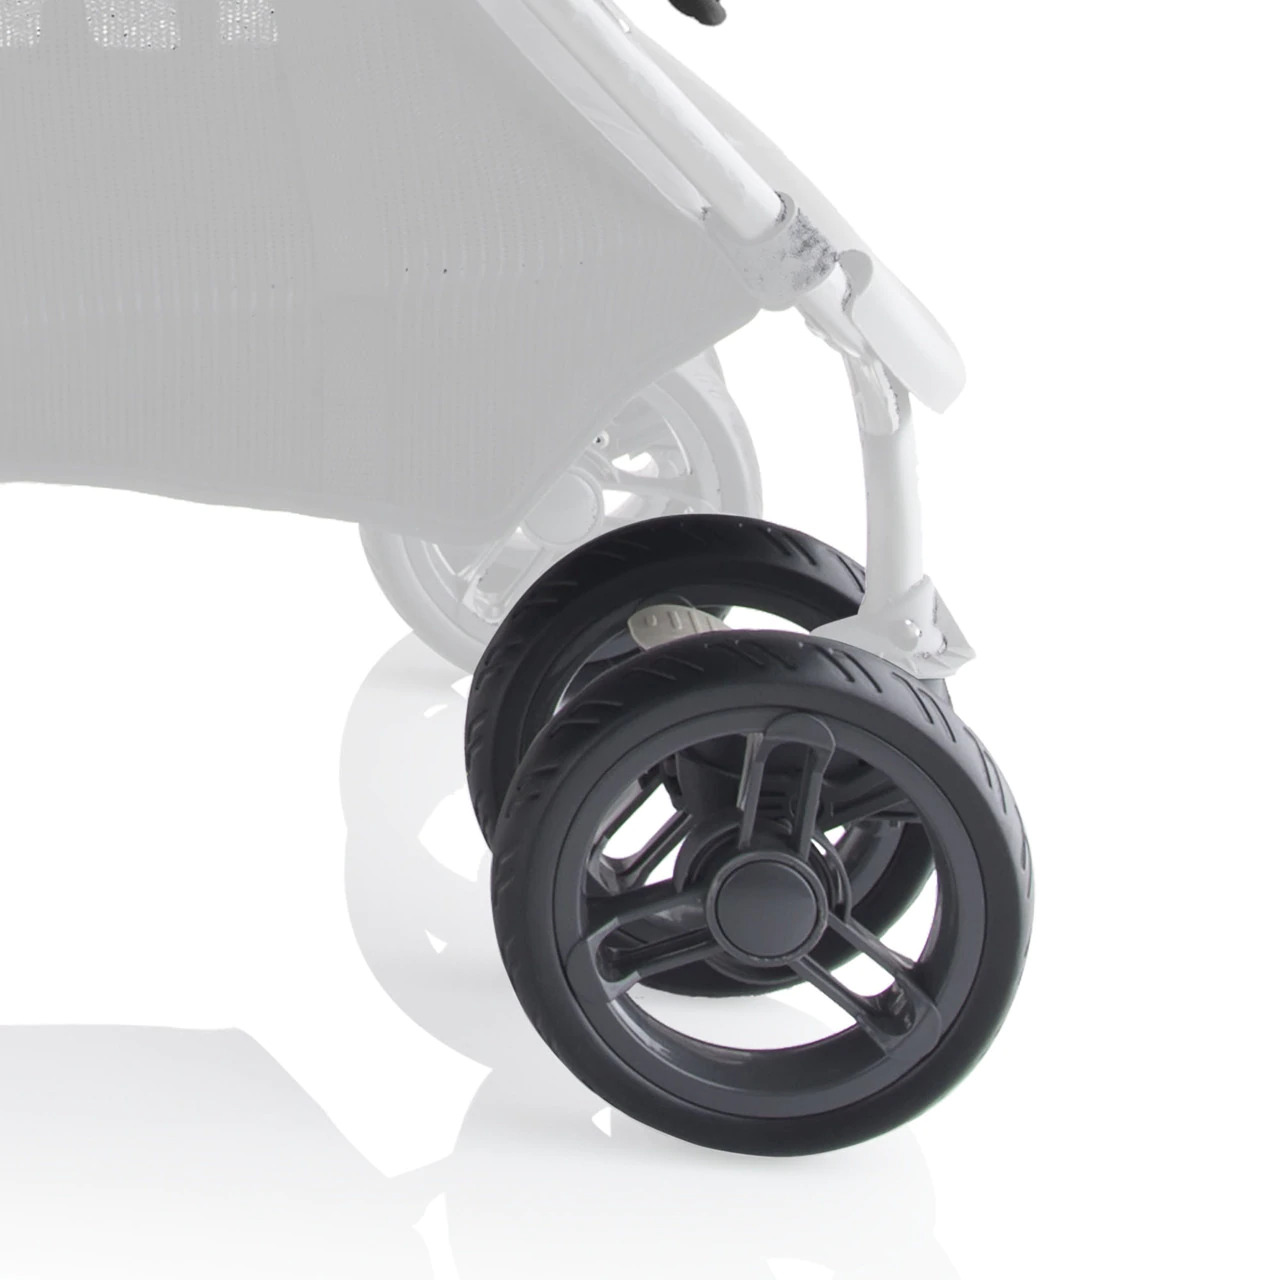 ScooterX2 Front Wheel|replacement parts|joovy